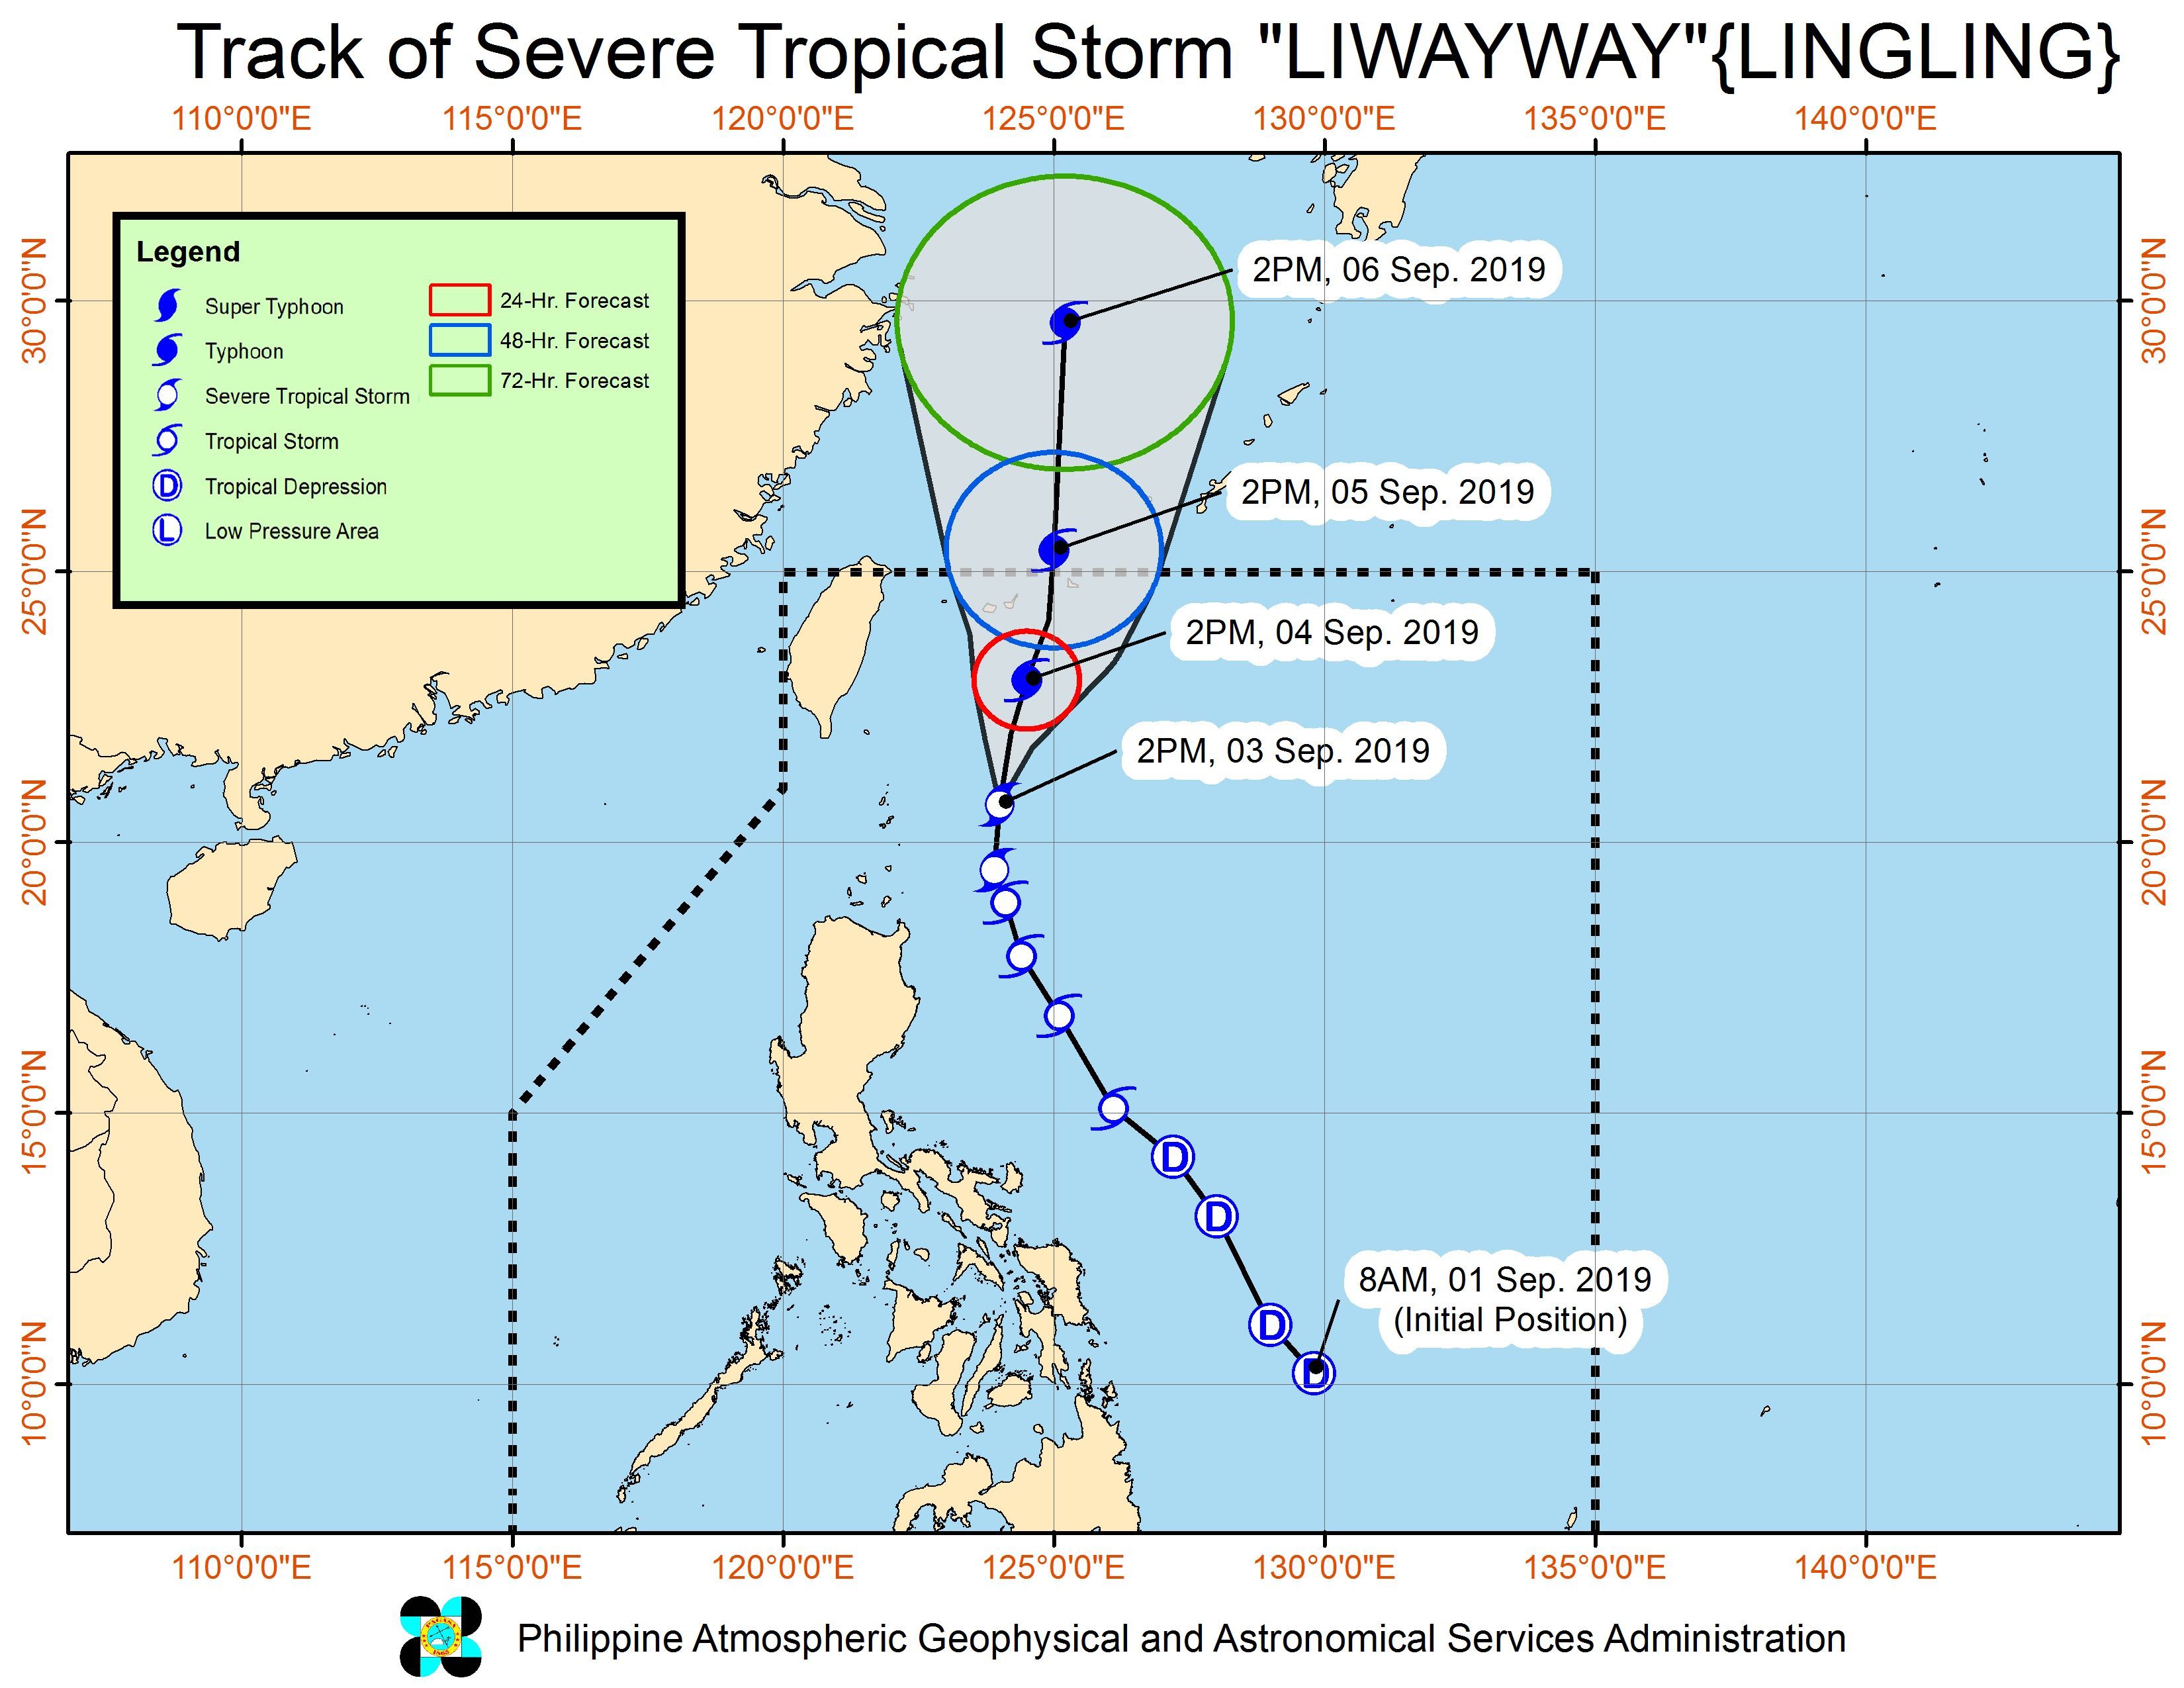 Forecast track of Severe Tropical Storm Liwayway (Lingling) as of September 3, 2019, 5 pm. Image from PAGASA 